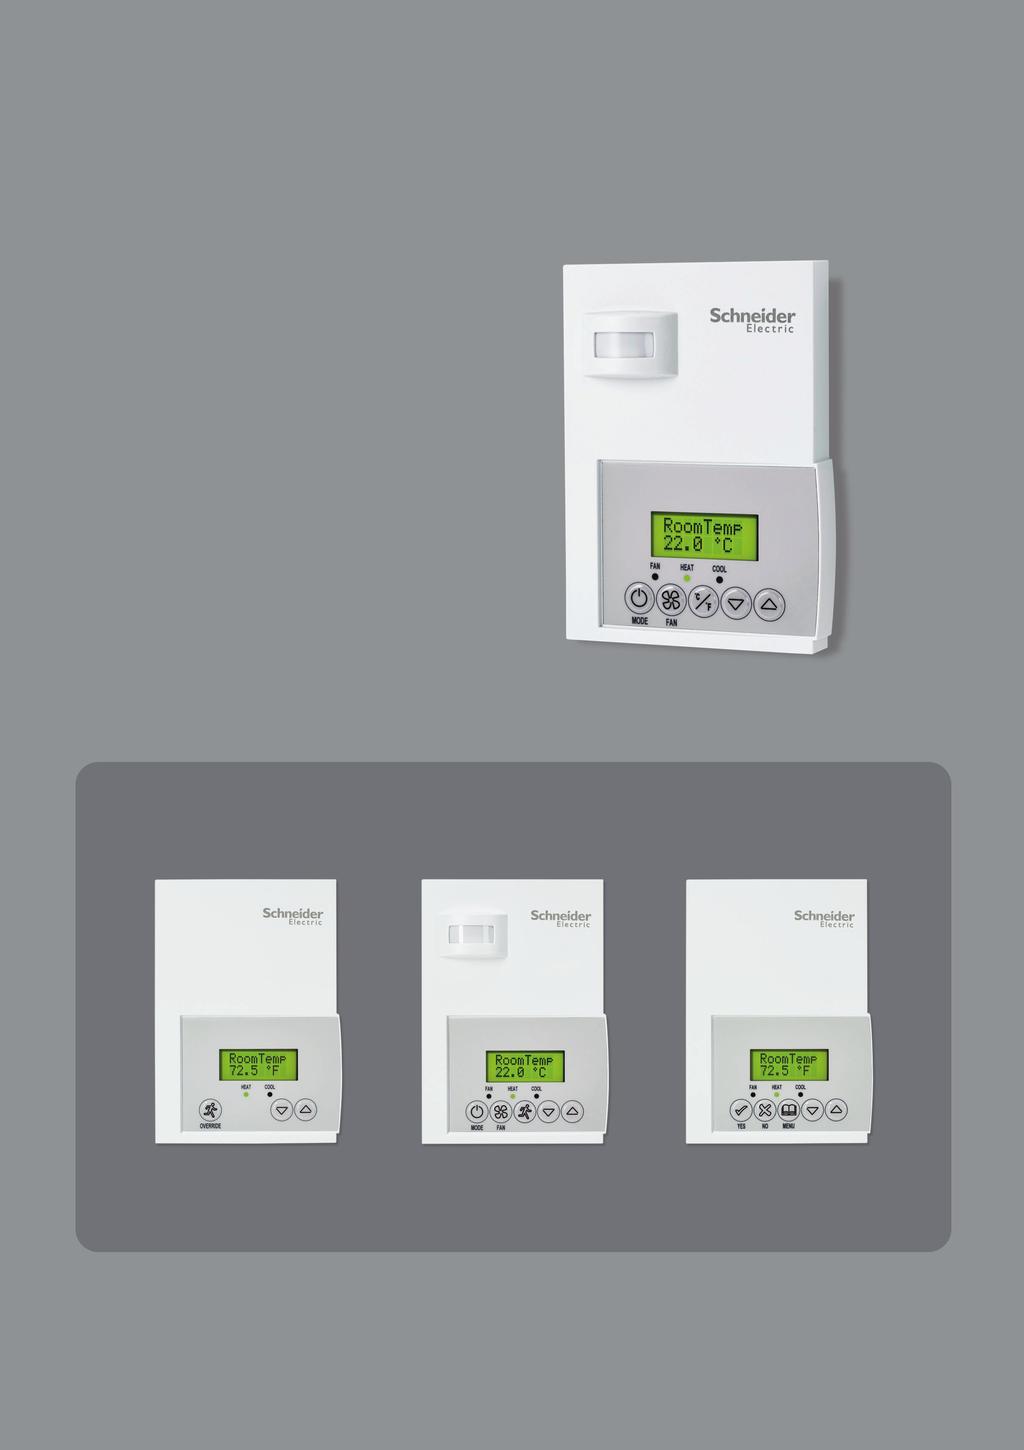 SE7000 Series Room Controllers > Wired or wireless functionality > Automatic energy savings with optional integrated passive infrared (PIR) motion sensor > No extra components or special tools